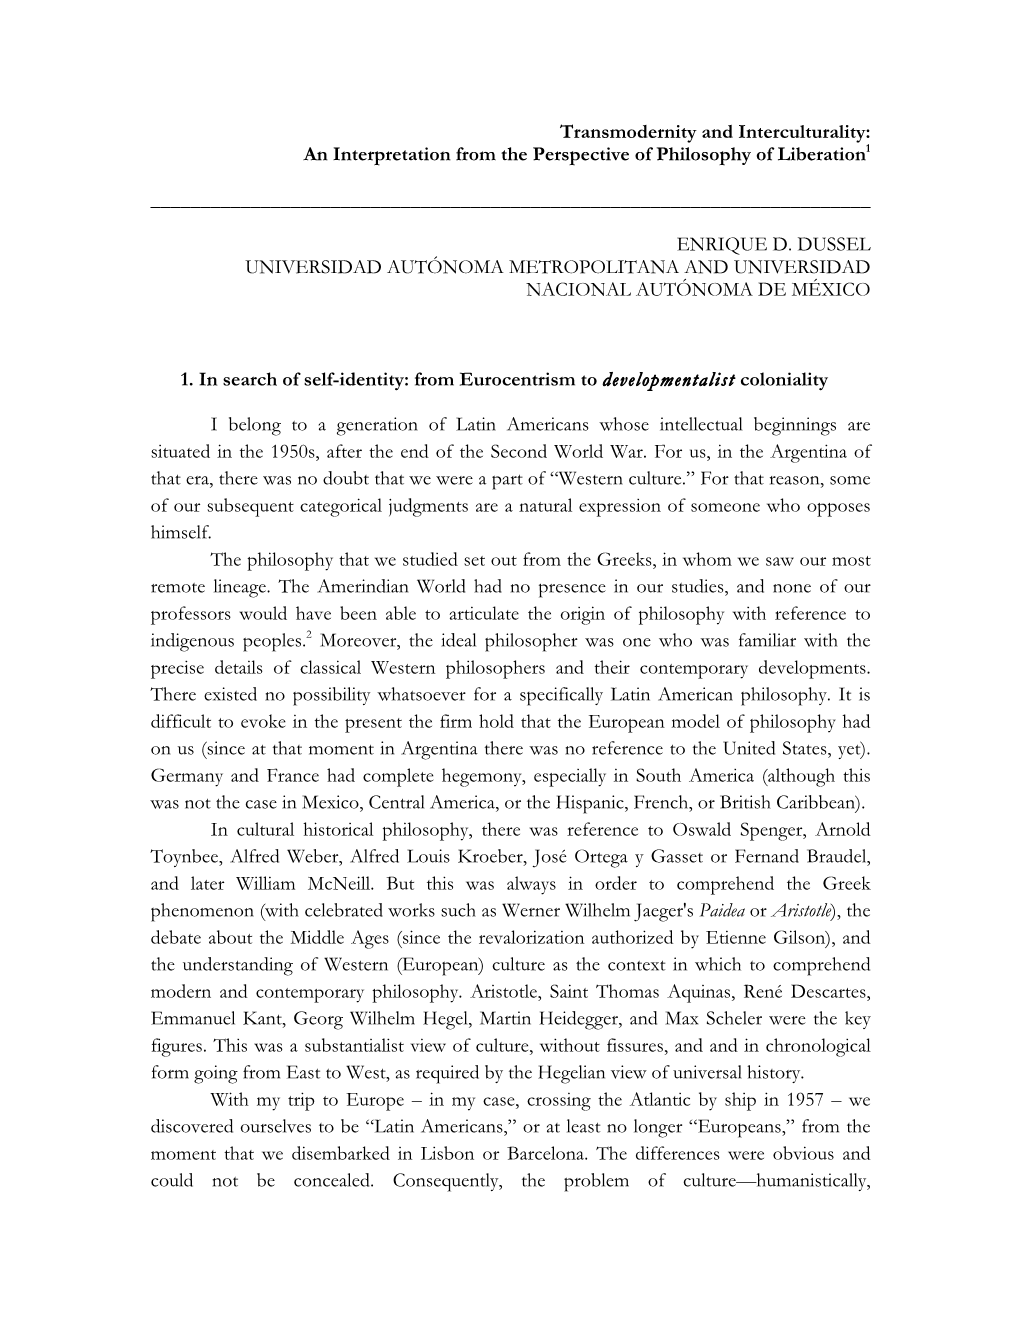 Transmodernity and Interculturality: an Interpretation from the Perspective of Philosophy of Liberation1